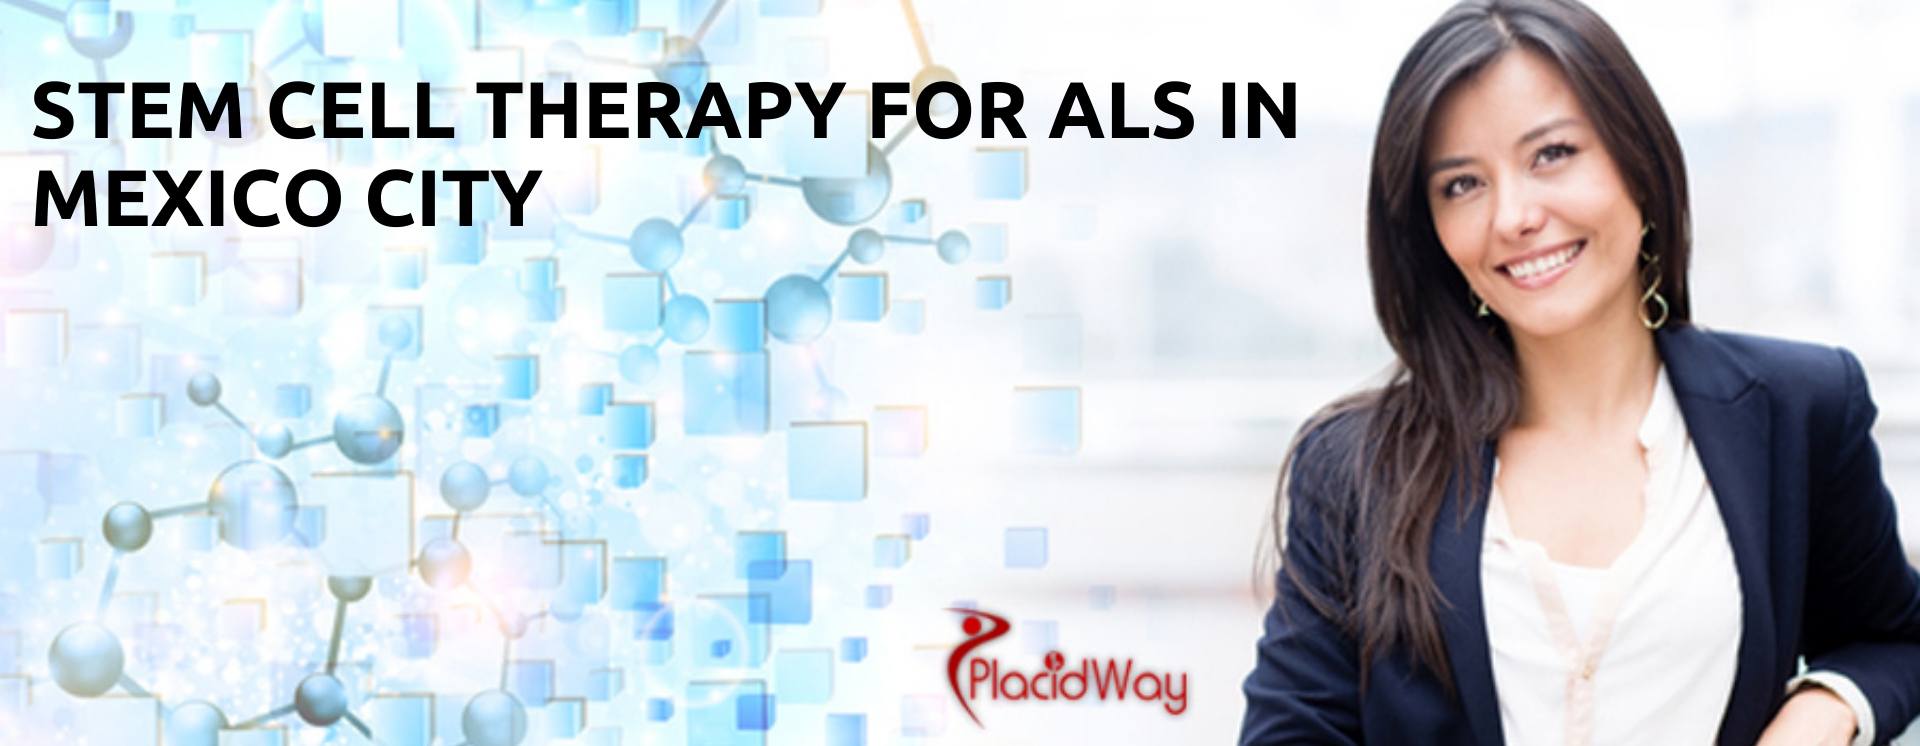 Stem Cell Therapy for ALS in Mexico City